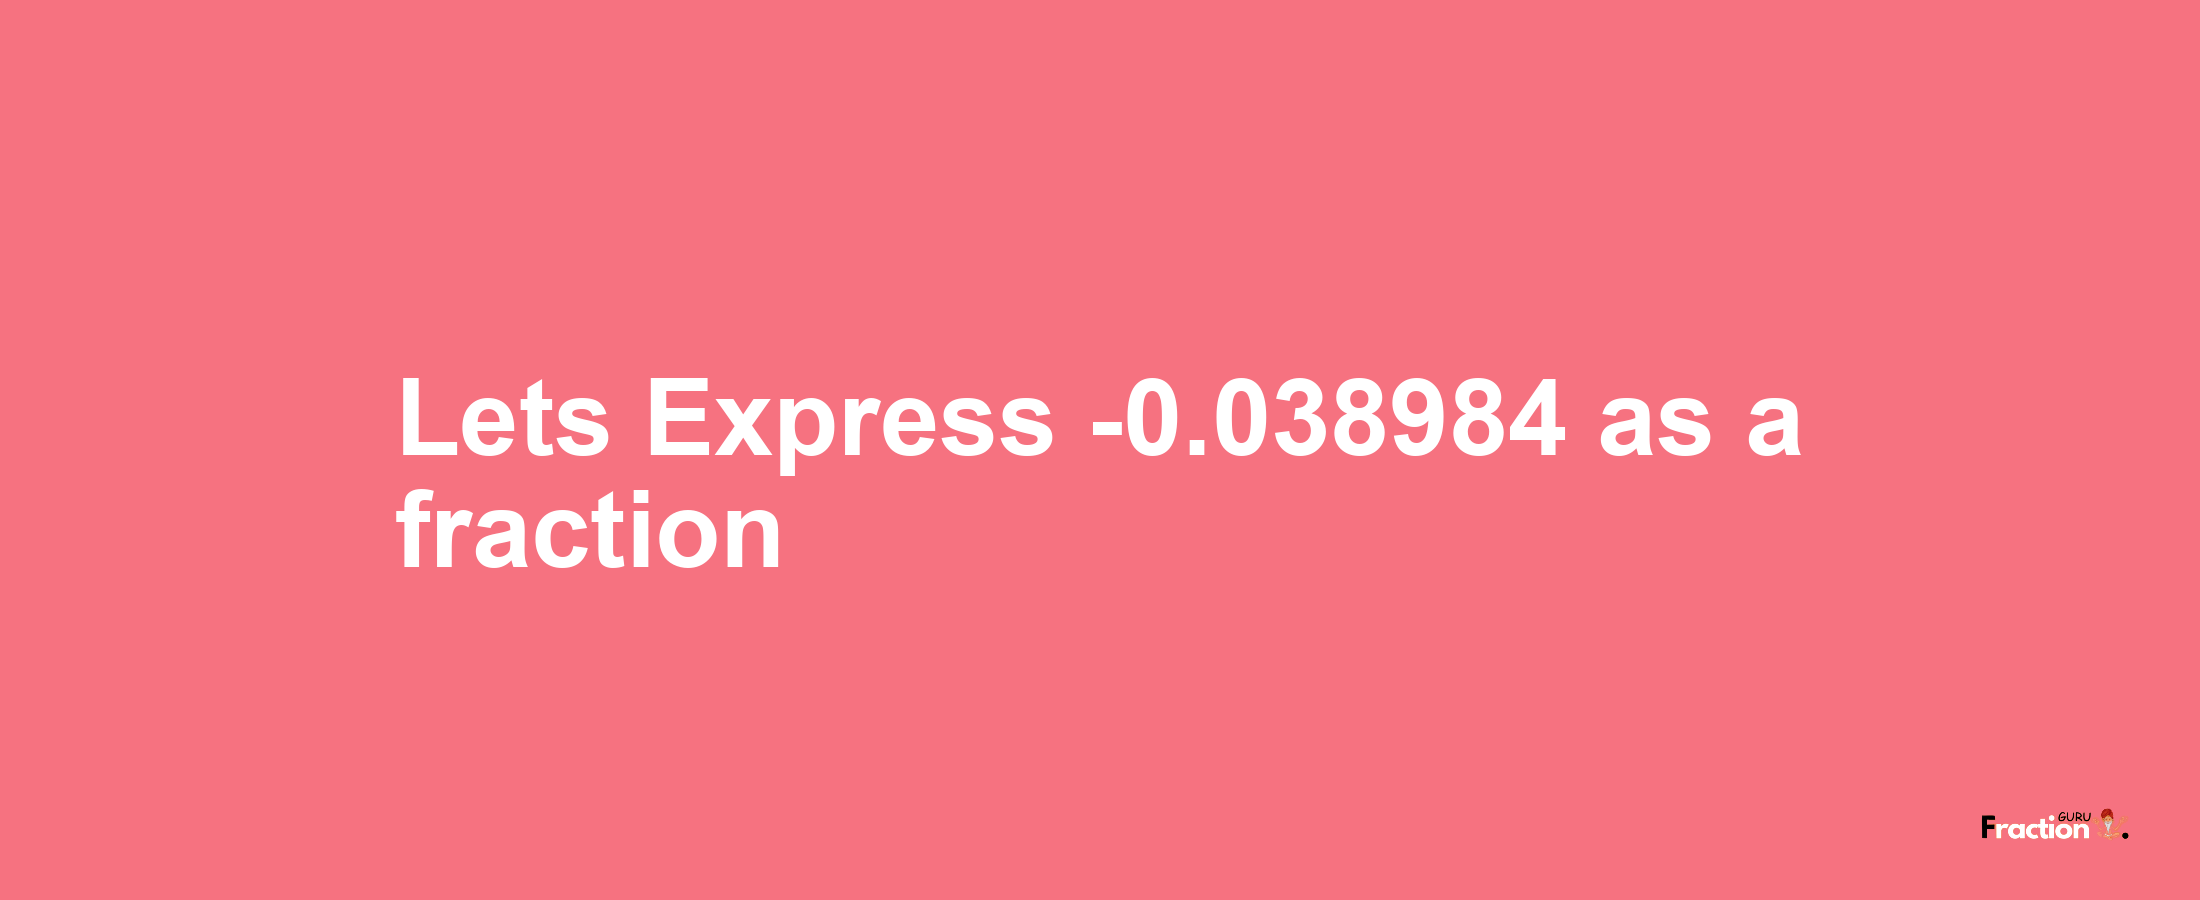 Lets Express -0.038984 as afraction